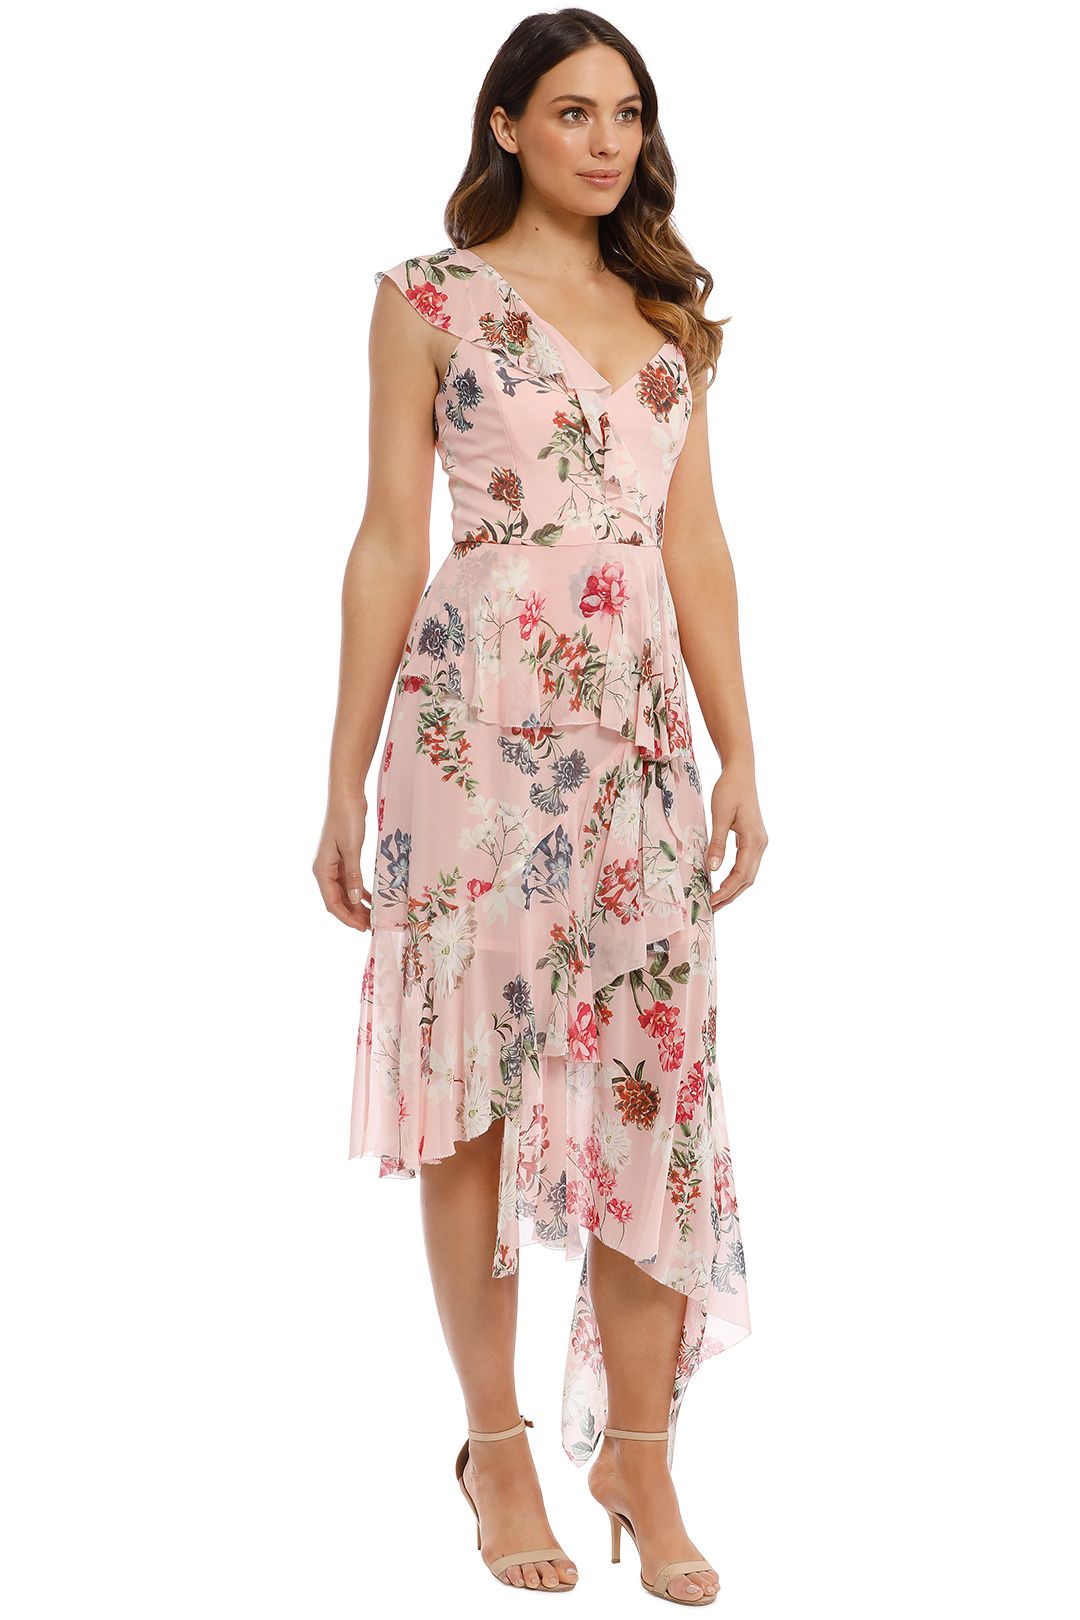 Nicholas the Label - Lilac Floral Frill Dress - Pink - Side